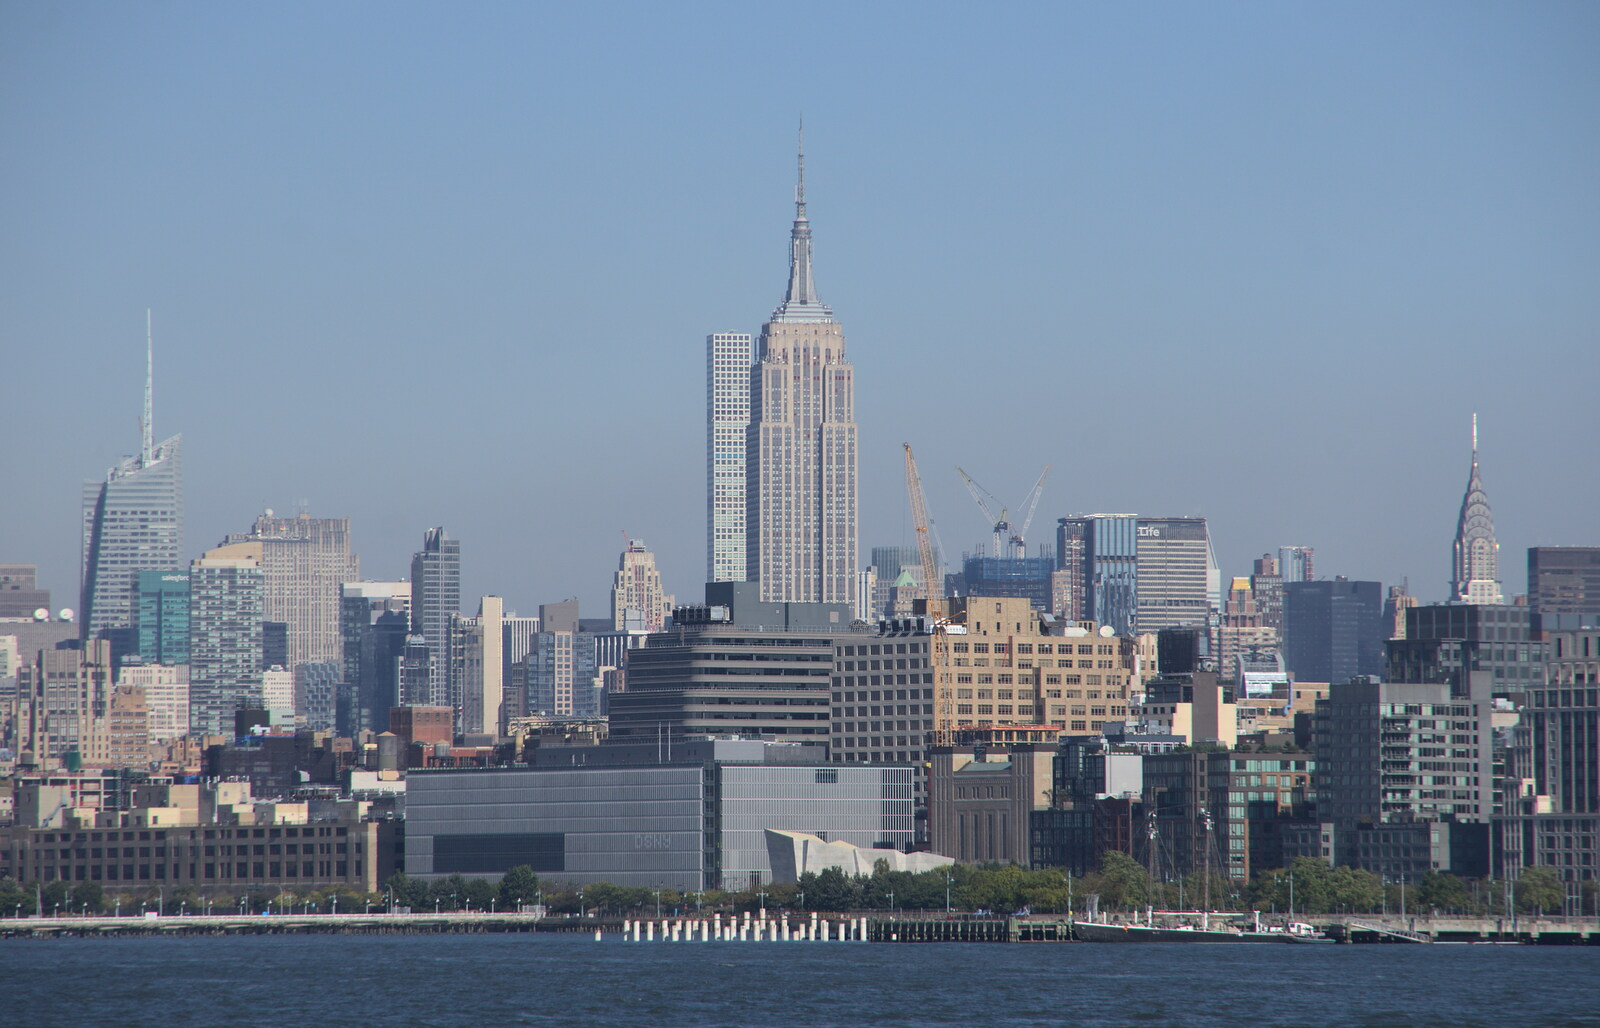 Empire State in the distance from The Liberty Cruise and One World Trade Center, New York, United States - 23rd October 2018